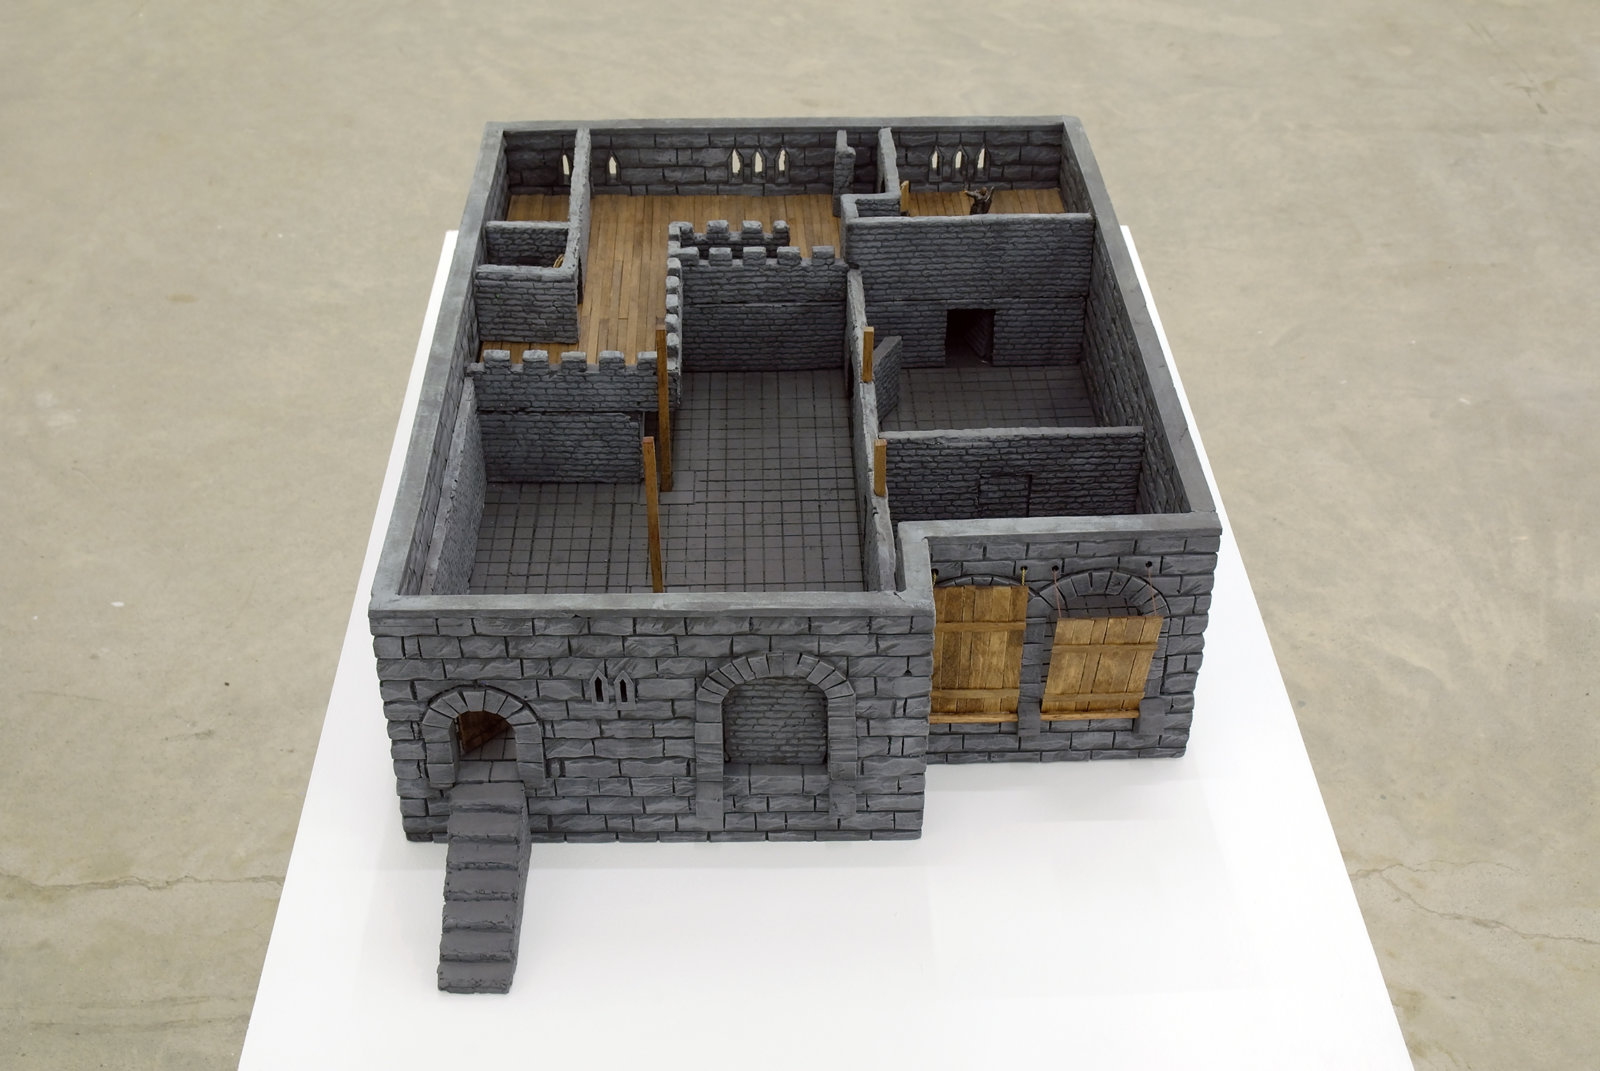 Kevin Schmidt, Dungeon Crawl, 2006, foam, balsa wood, plaster and paint, 12 x 17 x 24 in. (31 x 43 x 61 cm)